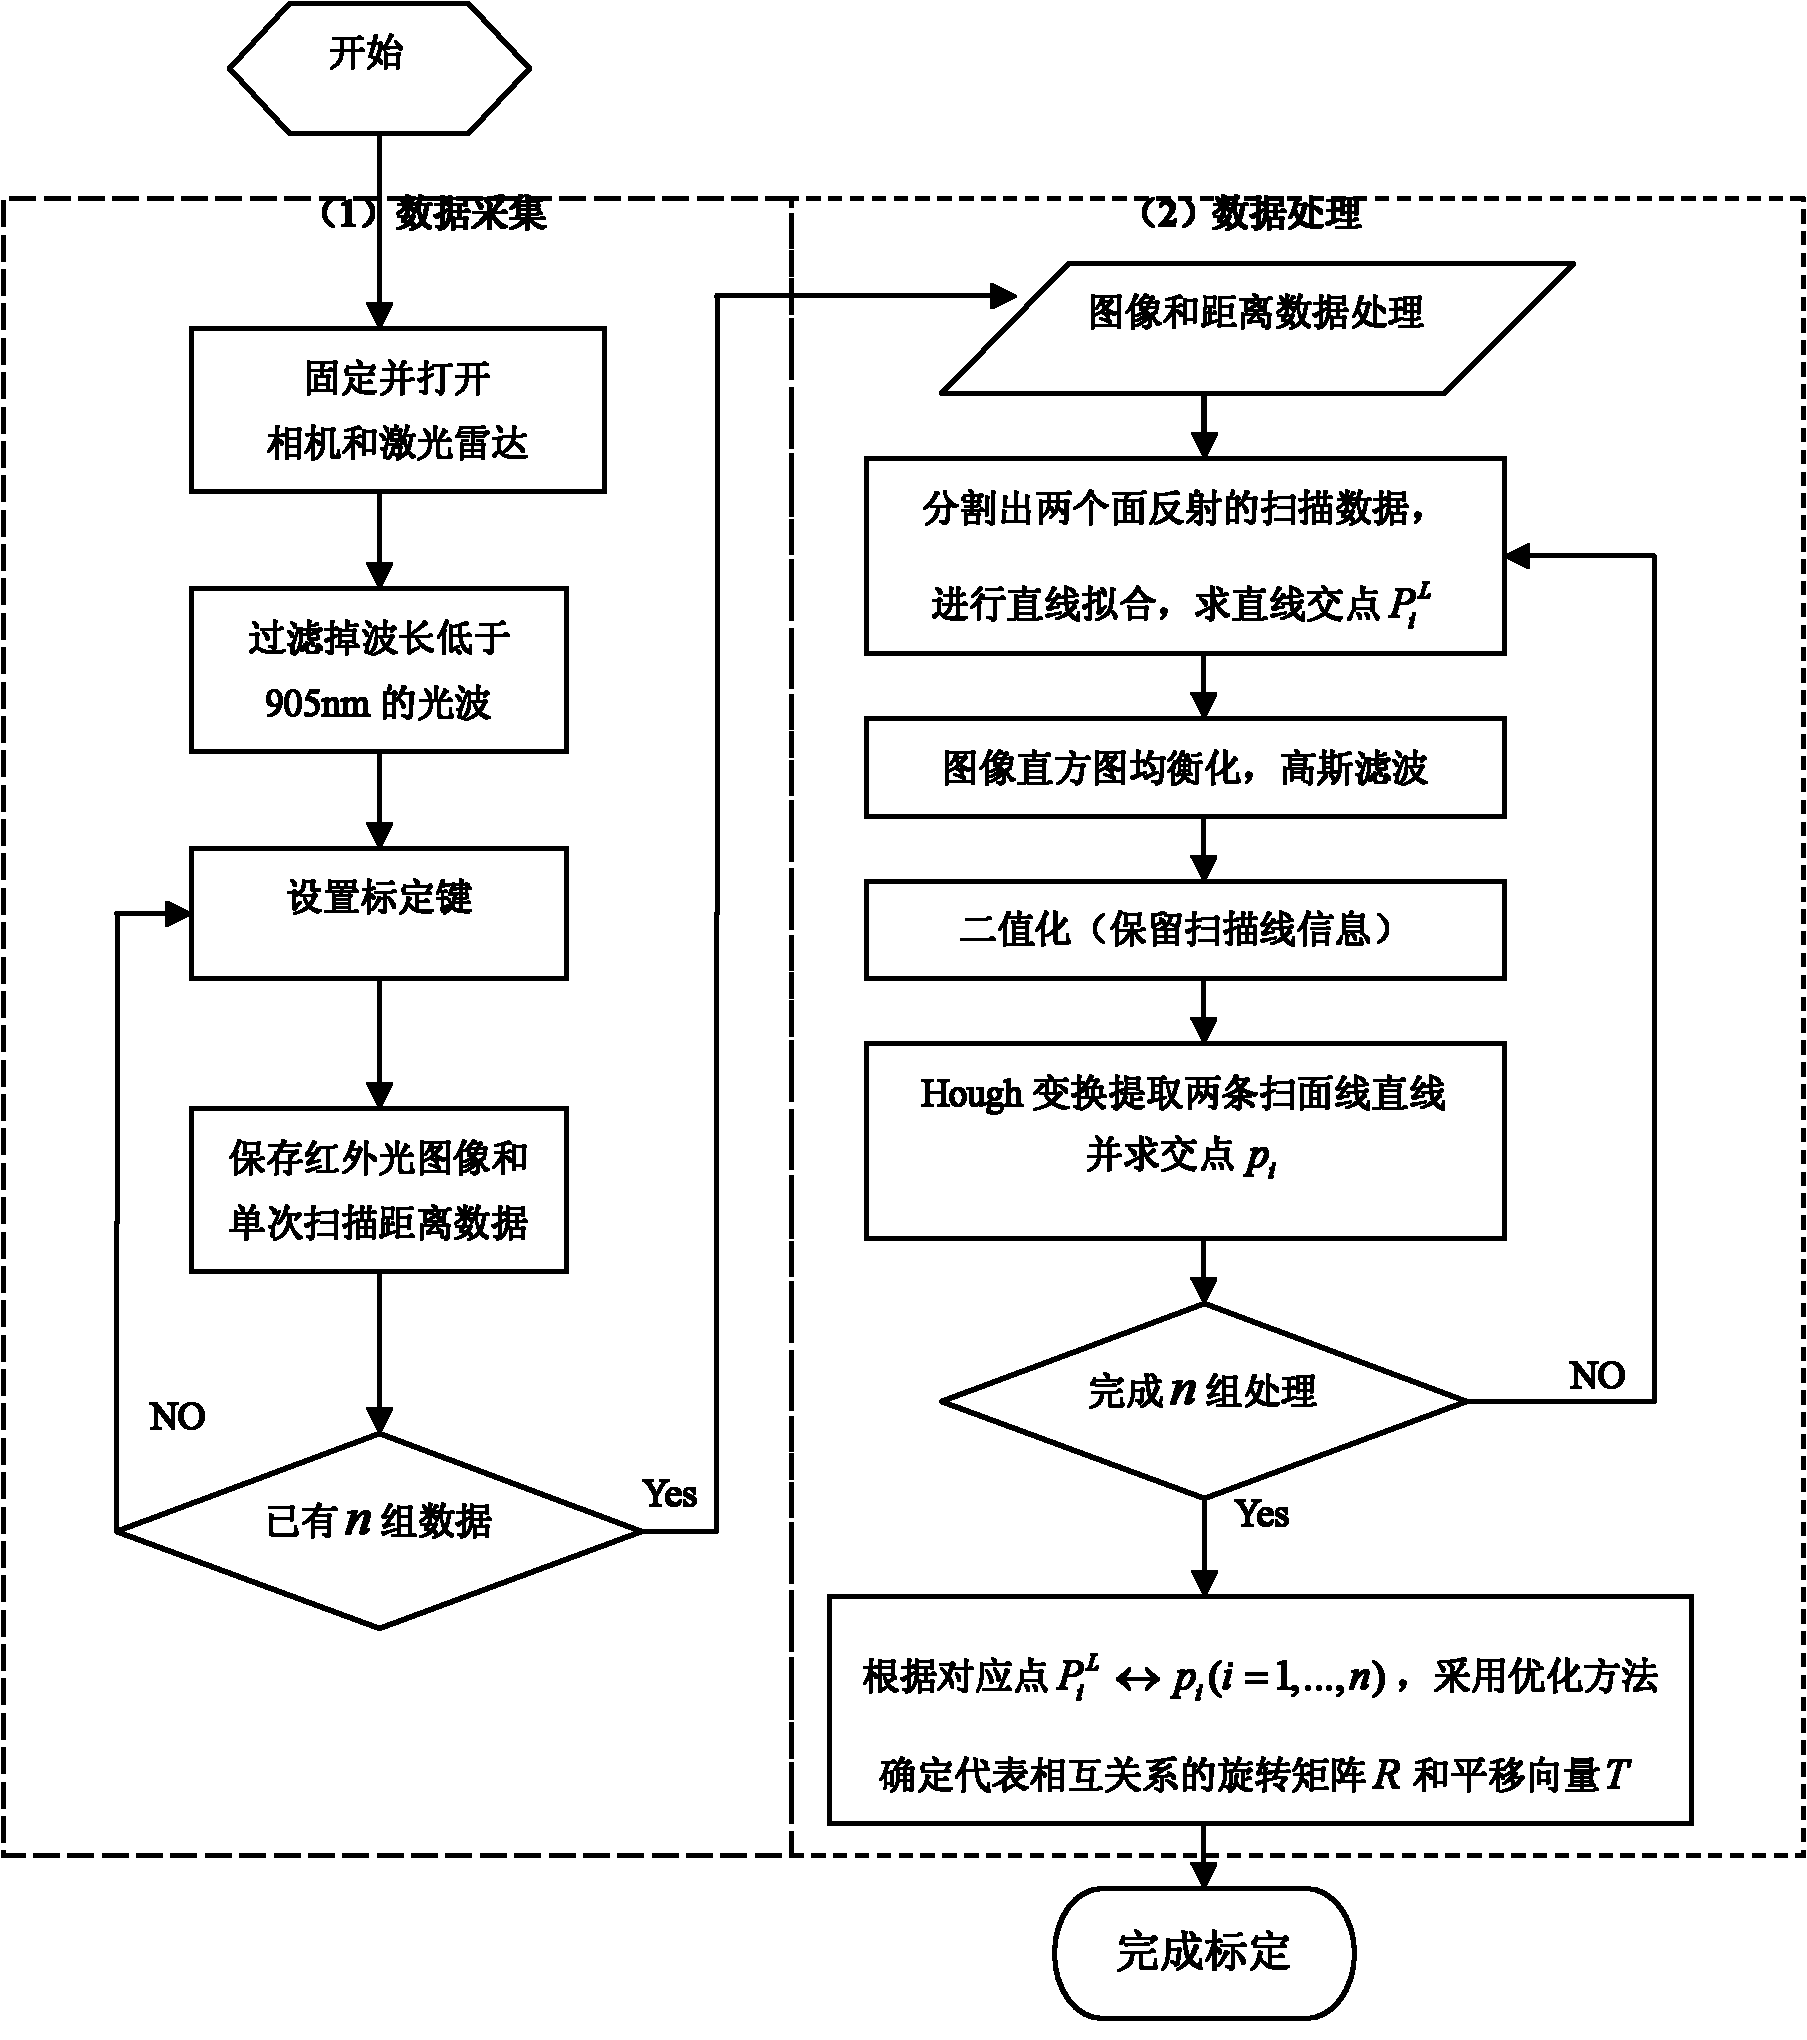 Calibration method of correlation between single line laser radar and CCD (Charge Coupled Device) camera